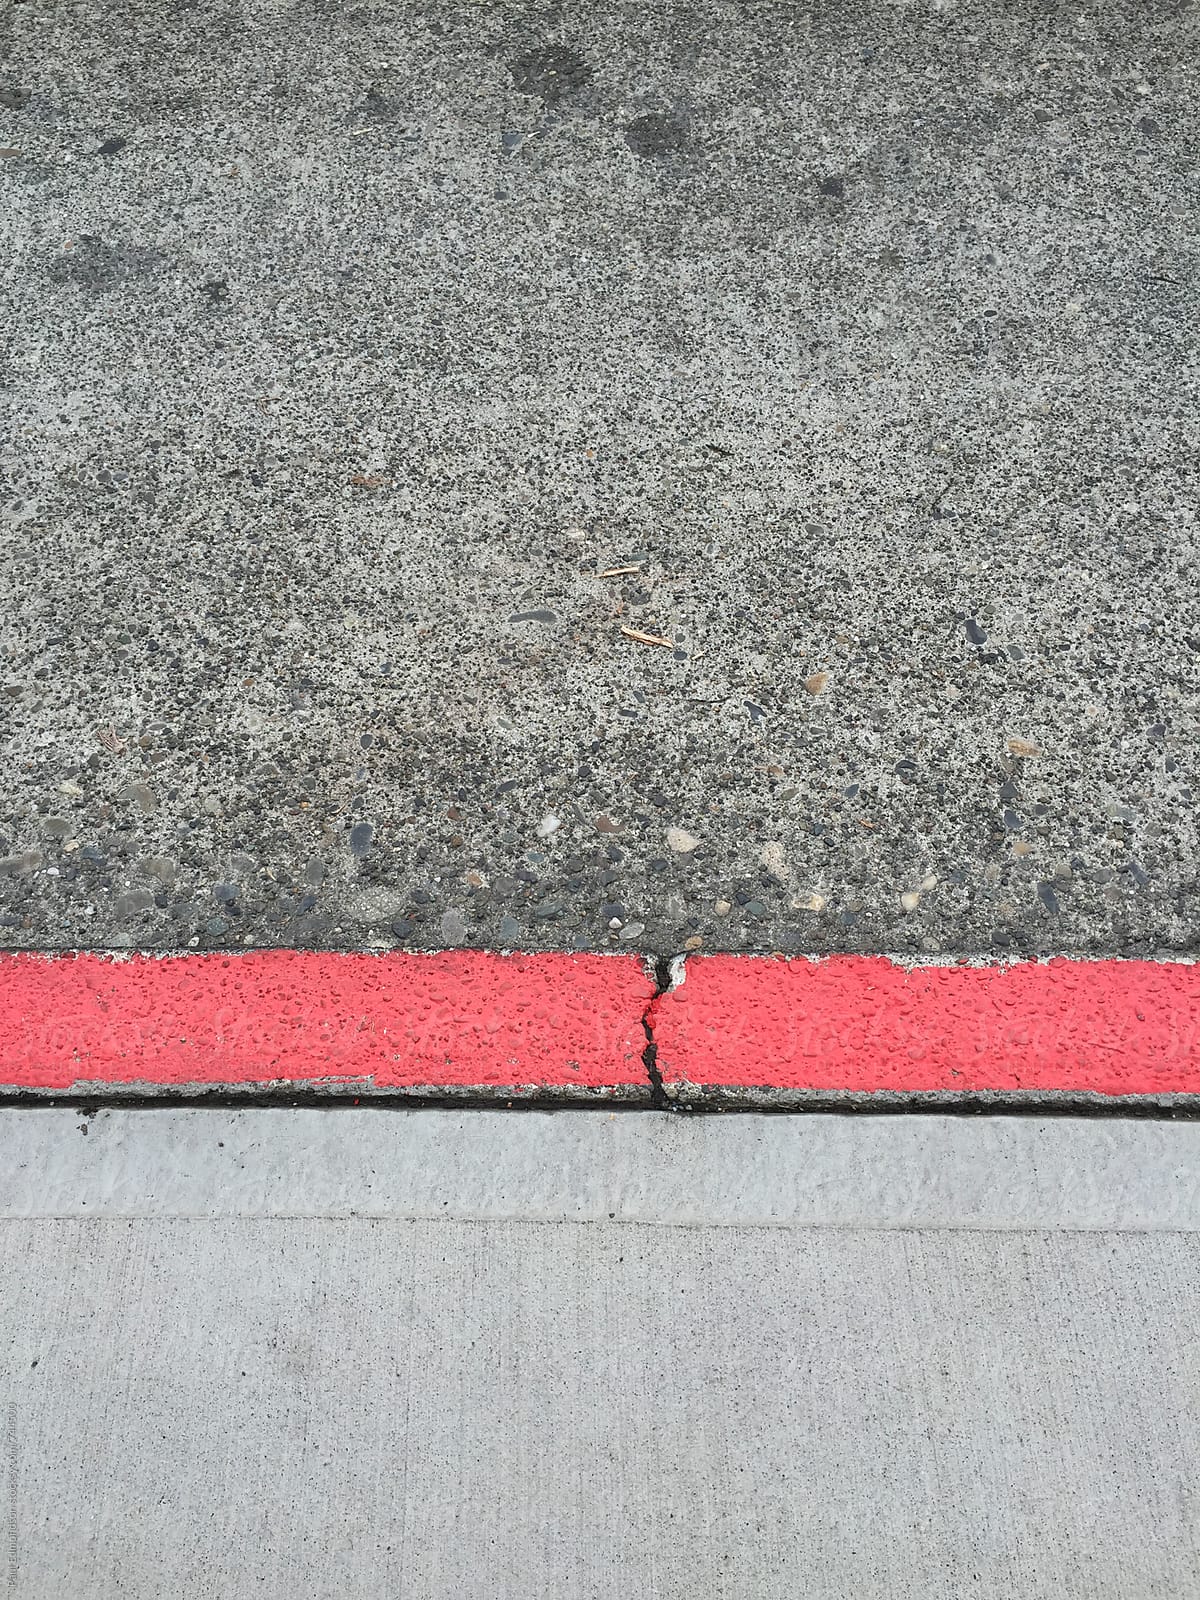 Painted red curb along urban sidewalk and street